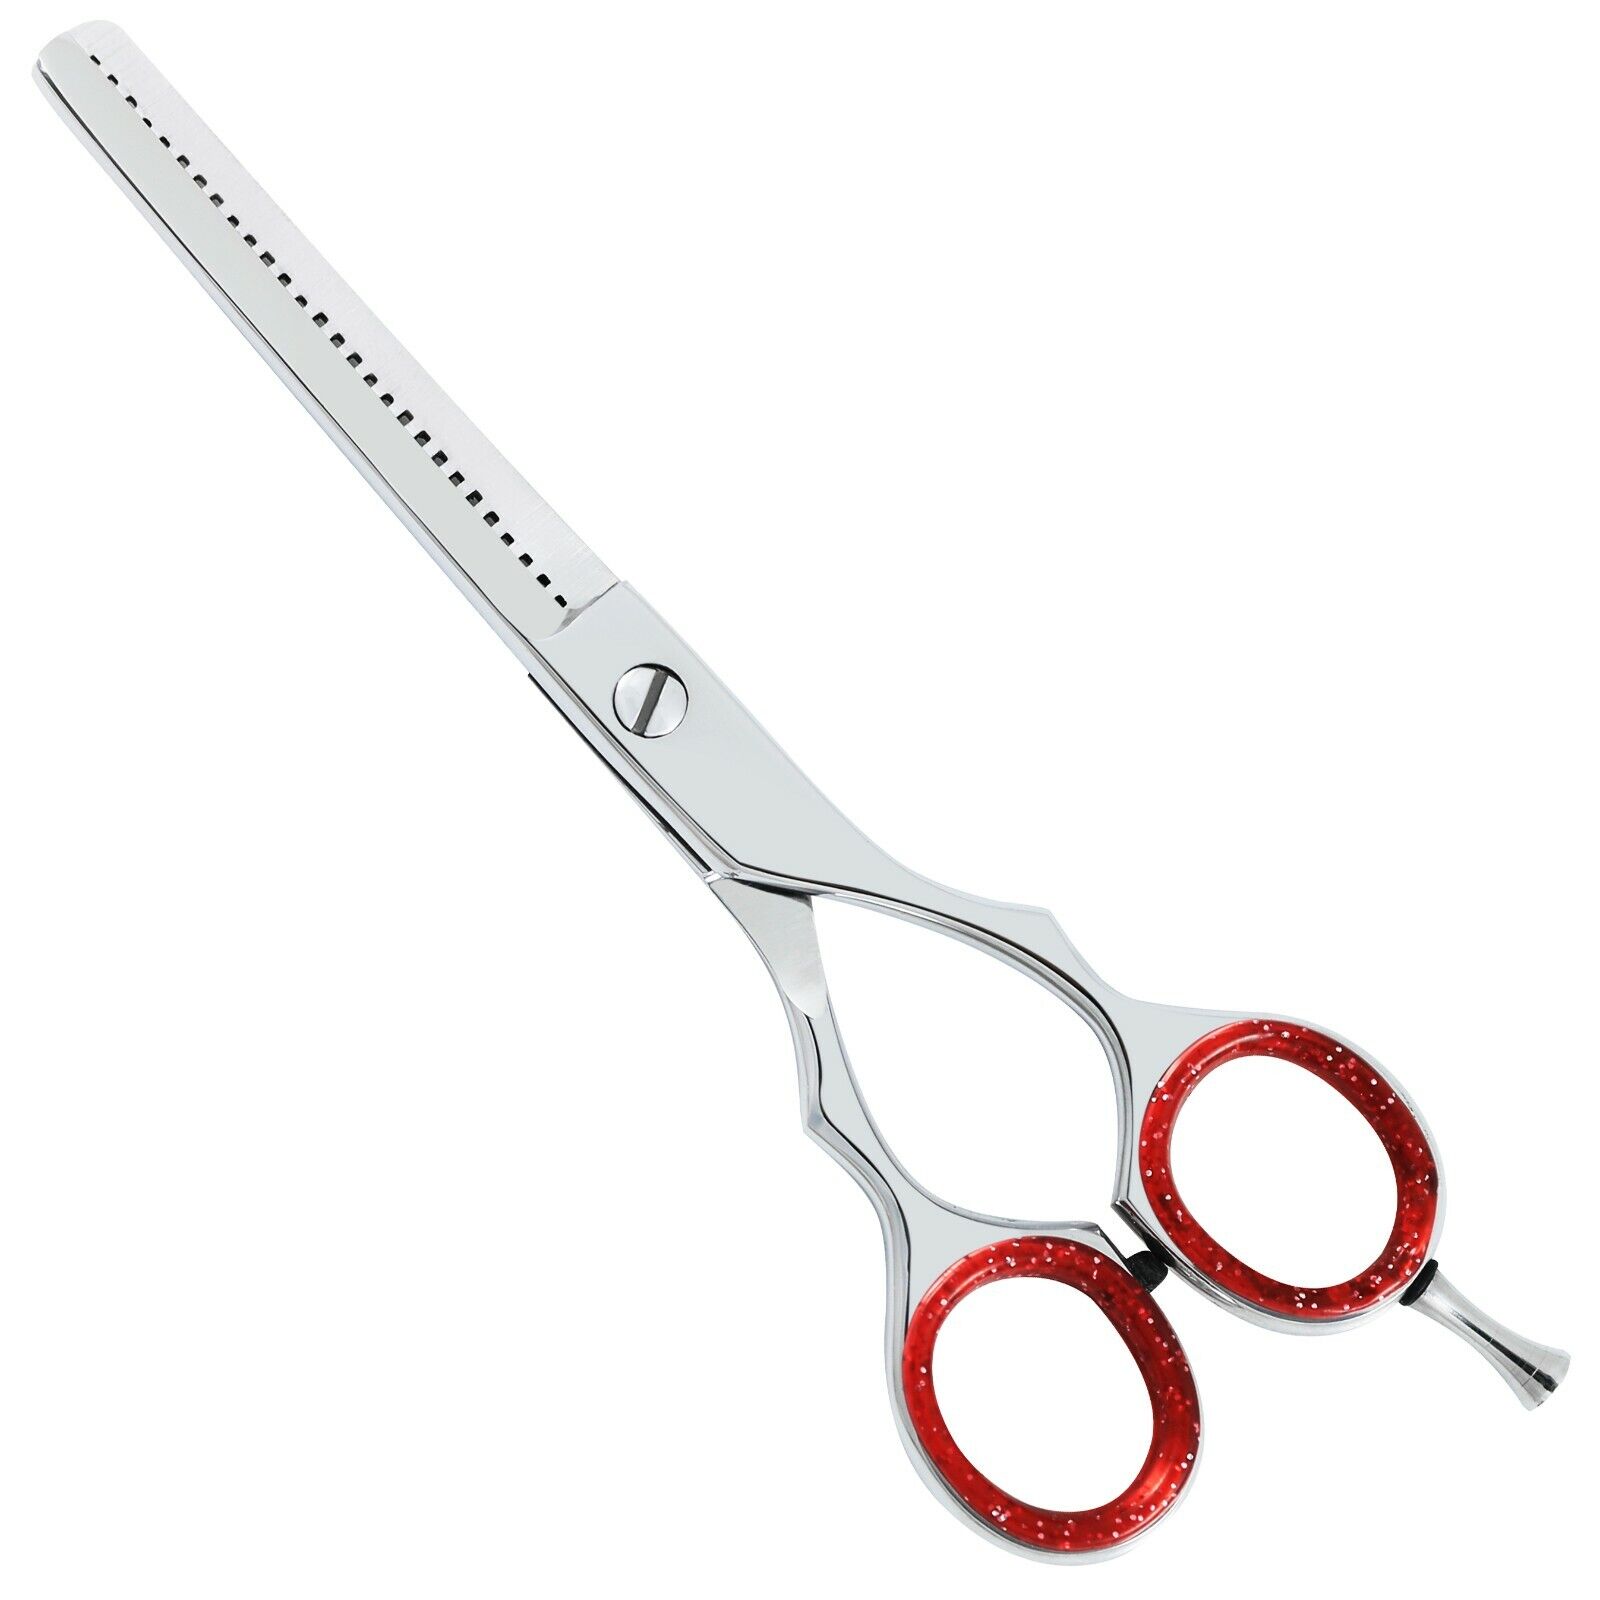 PROFESSIONAL BARBER HAIR CUTTING+THINNING SCISSORS BARBER SHEARS SET 6.5"  vertical int Does Not Apply - фотография #4